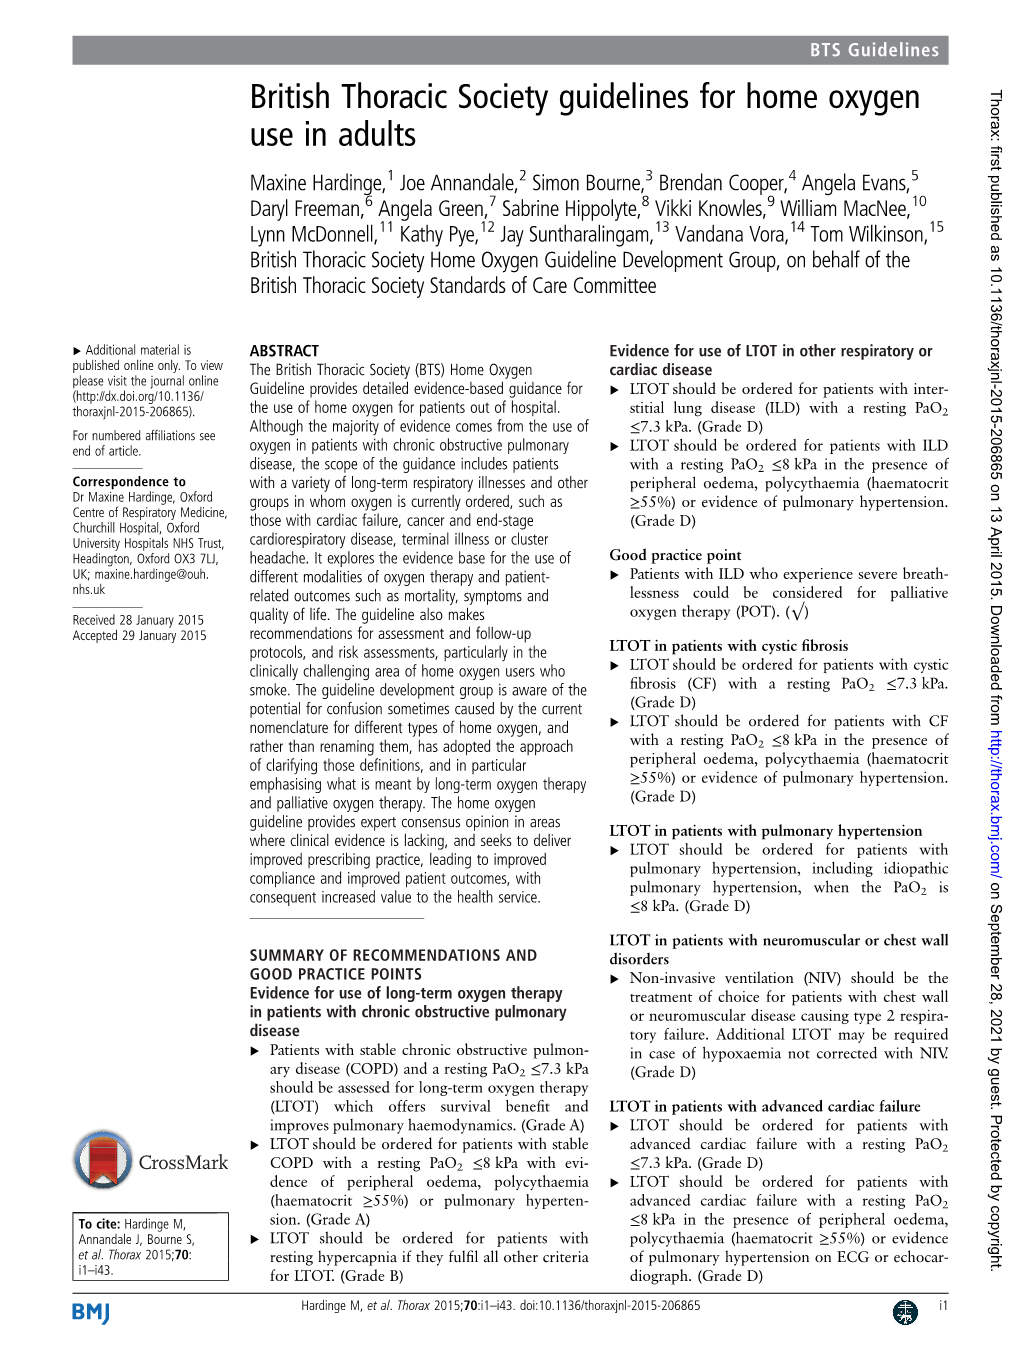 British Thoracic Society Guidelines for Home Oxygen Use in Adults